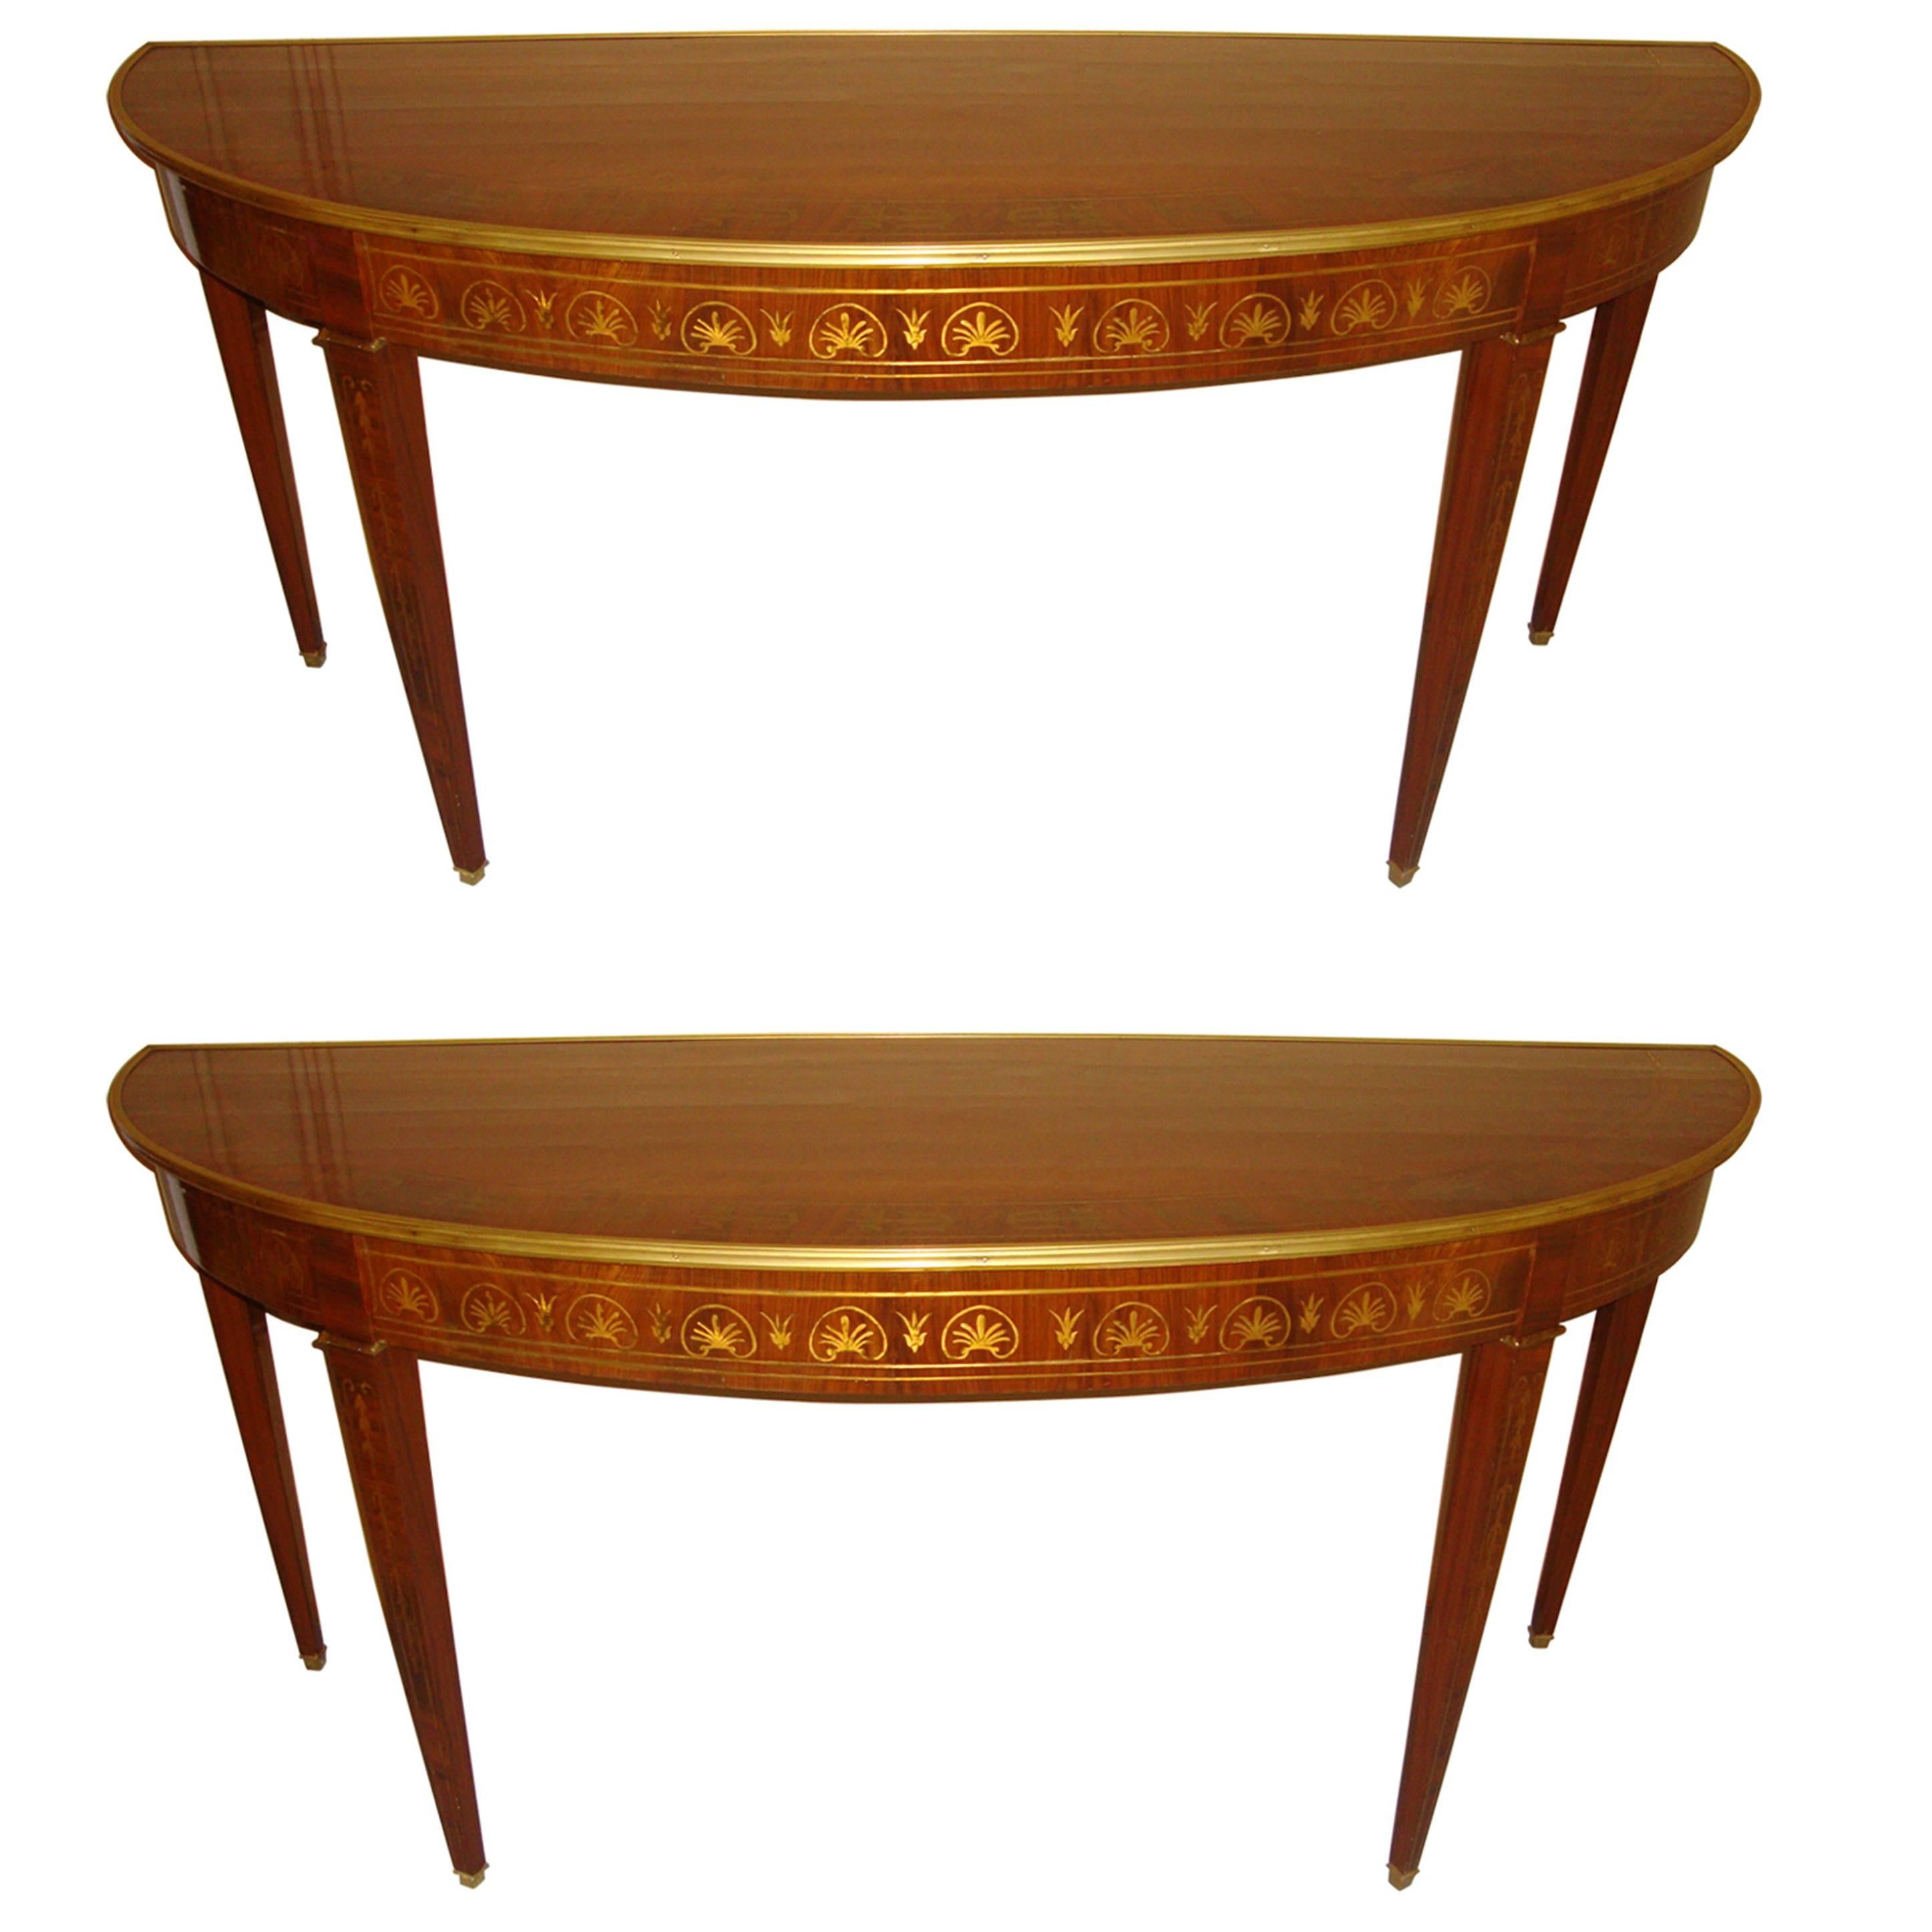 Neoclassical, Demilune Console Tables, Brown Wood, Brass Inlay, Europe, 1970s